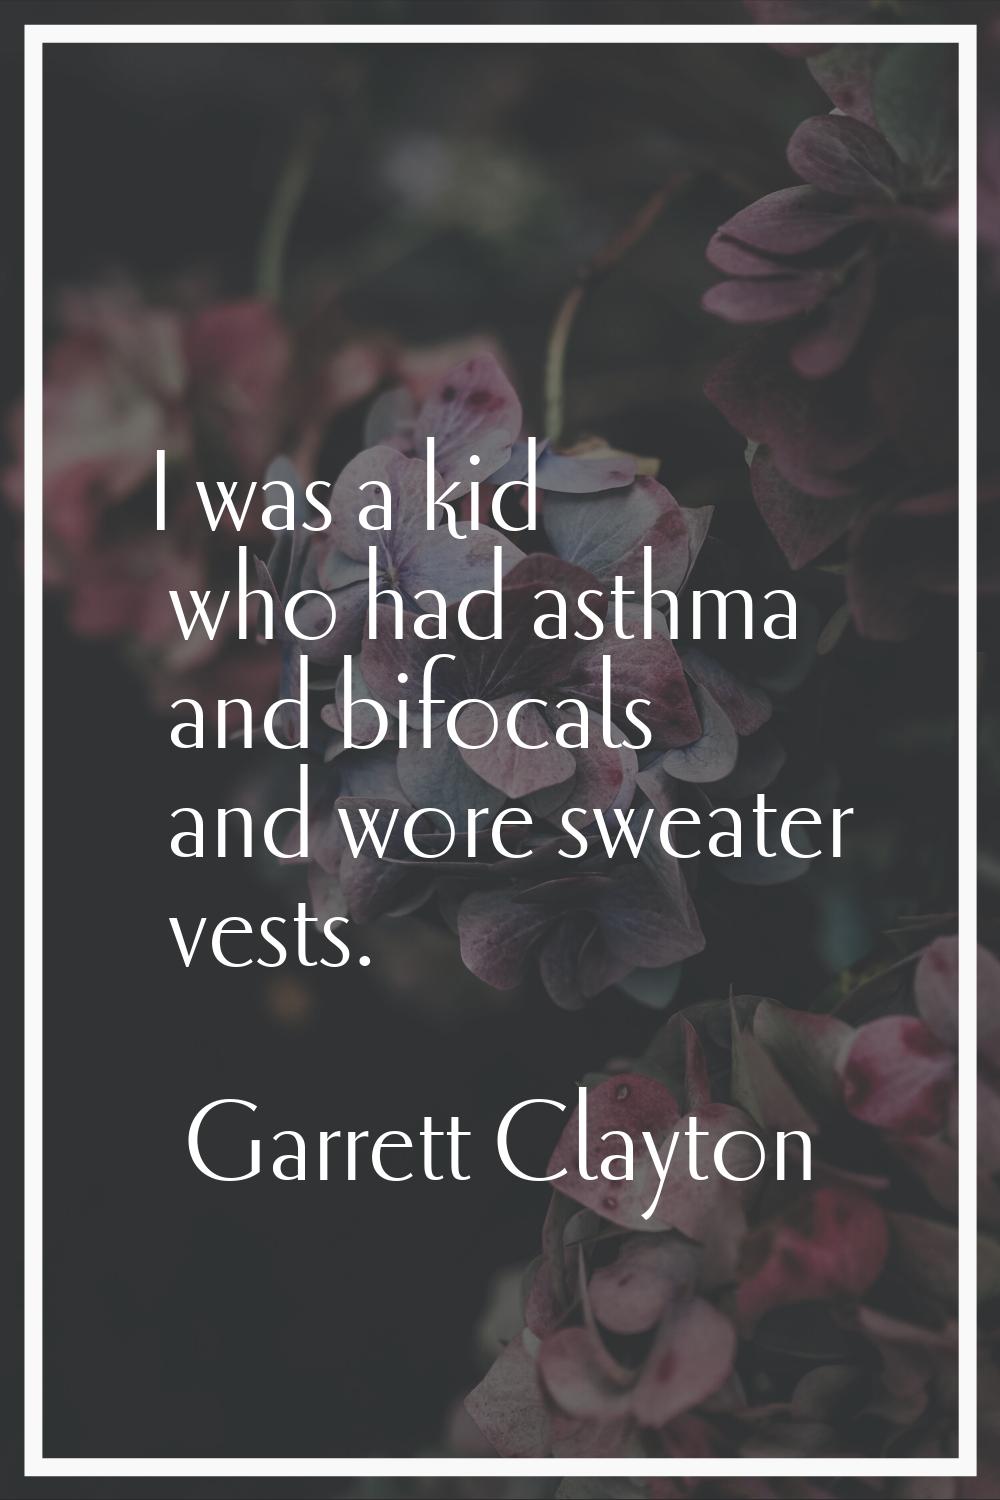 I was a kid who had asthma and bifocals and wore sweater vests.